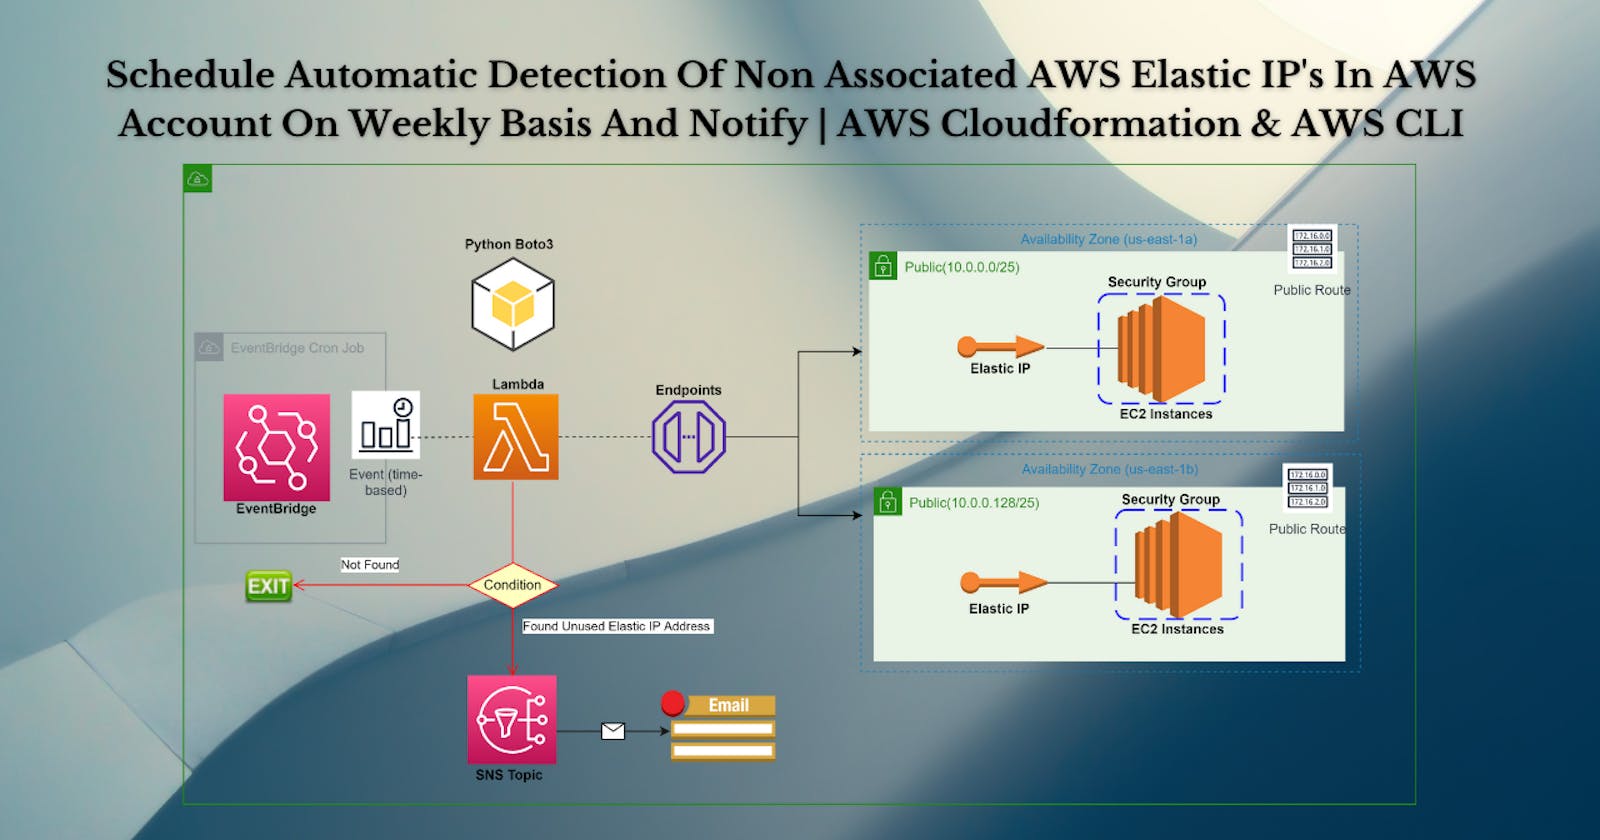 Schedule Automatic Detection Of Non Associated AWS Elastic IP's In AWS Account On Weekly Basis And Notify | AWS Cloudformation & AWS CLI